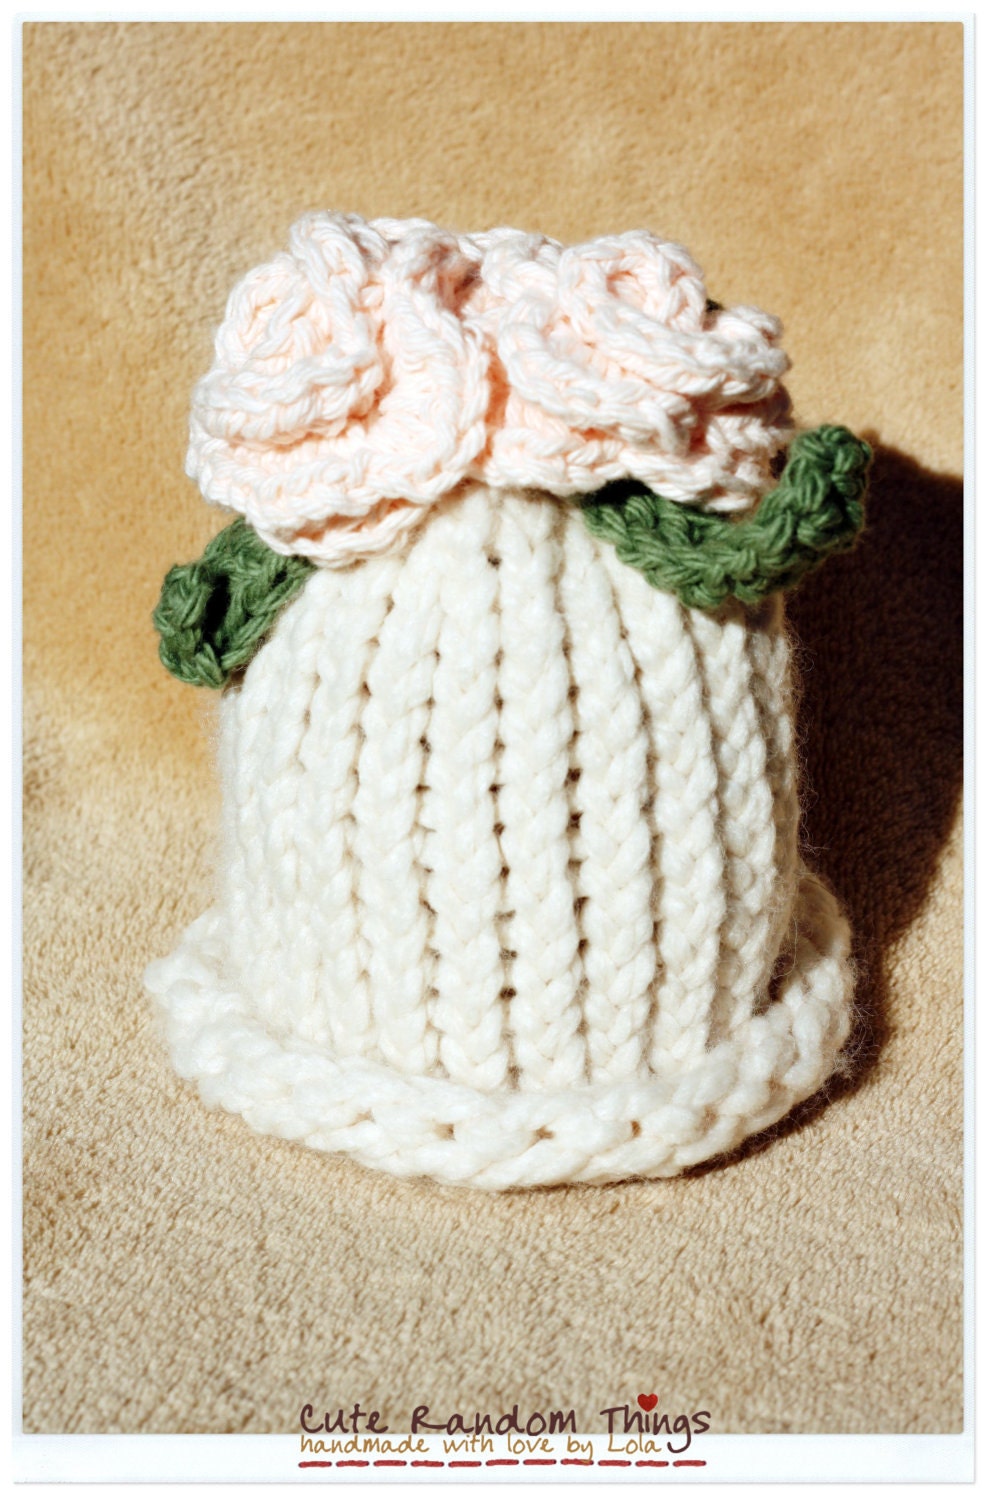 Cute little Old Lady-. Knitted baby hat